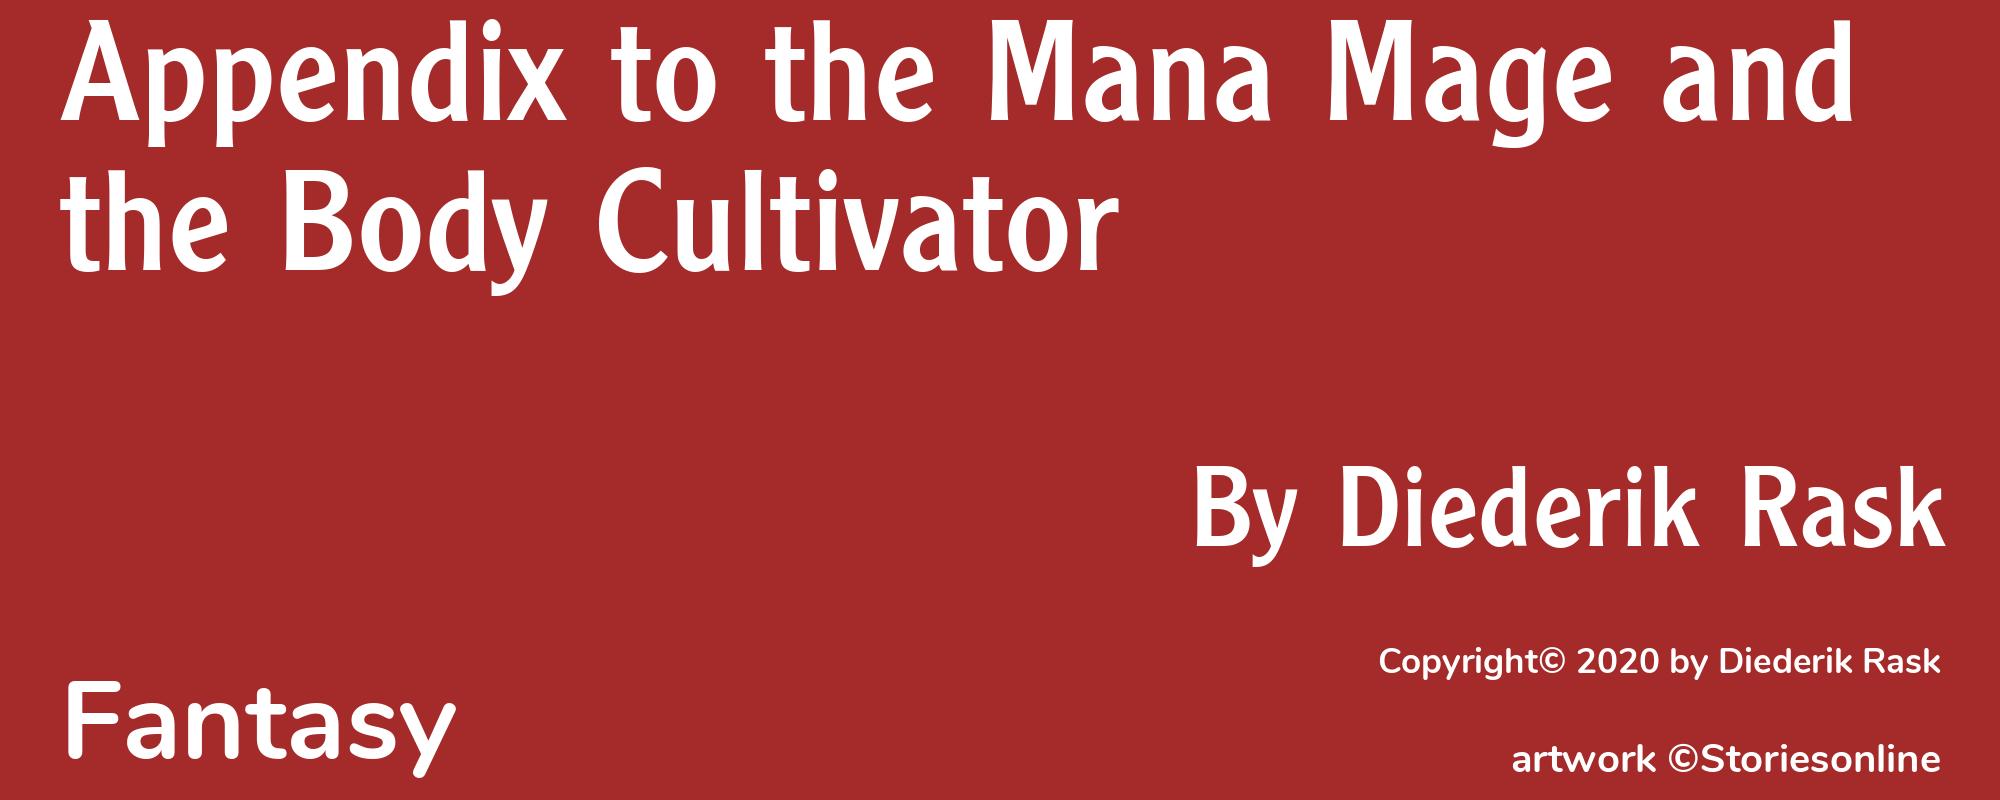 Appendix to the Mana Mage and the Body Cultivator - Cover